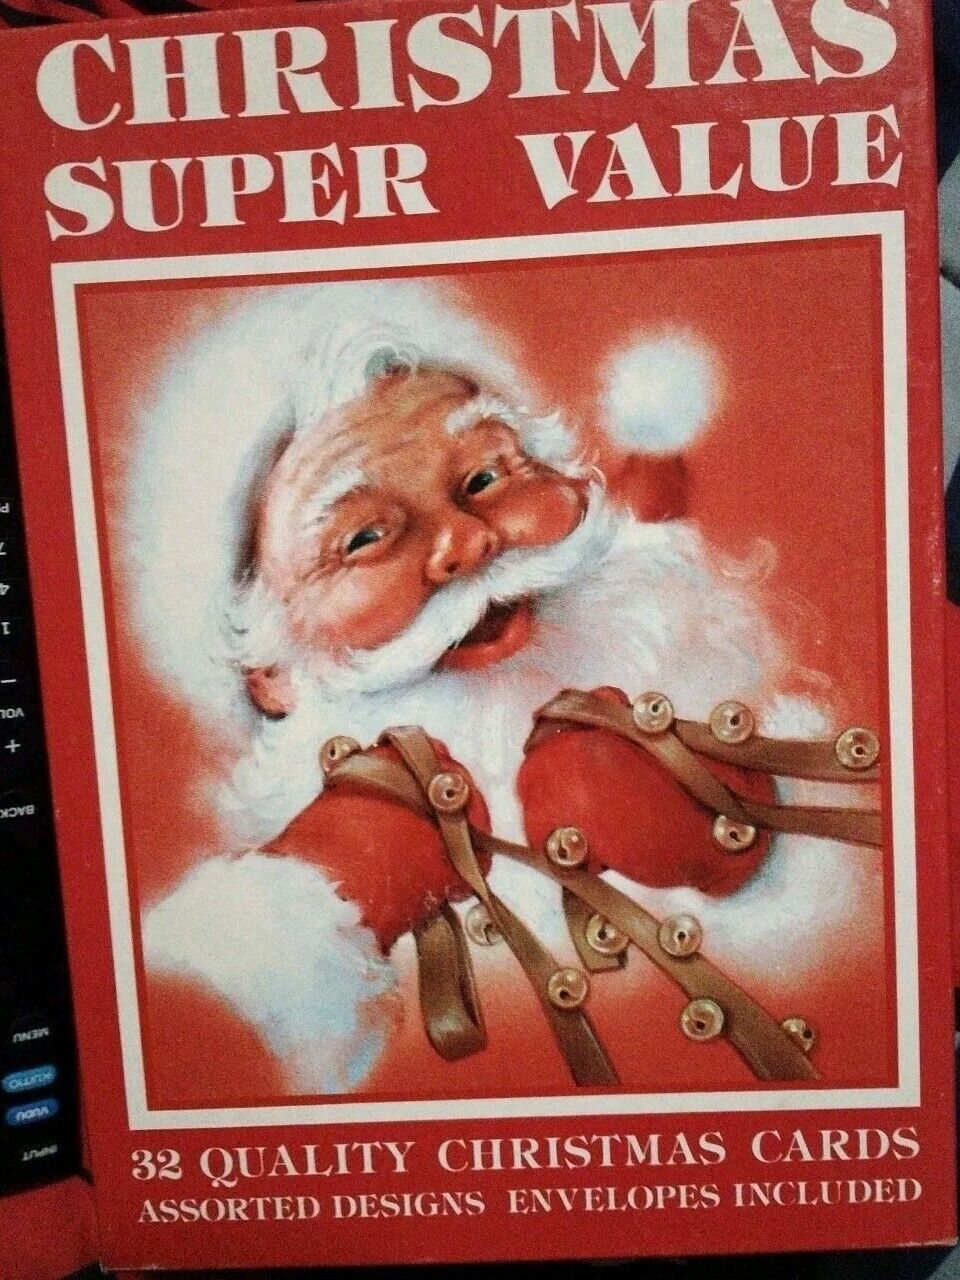 Vintage Christmas Super Value Christmas Cards Walmart Made in USA Lot of 31